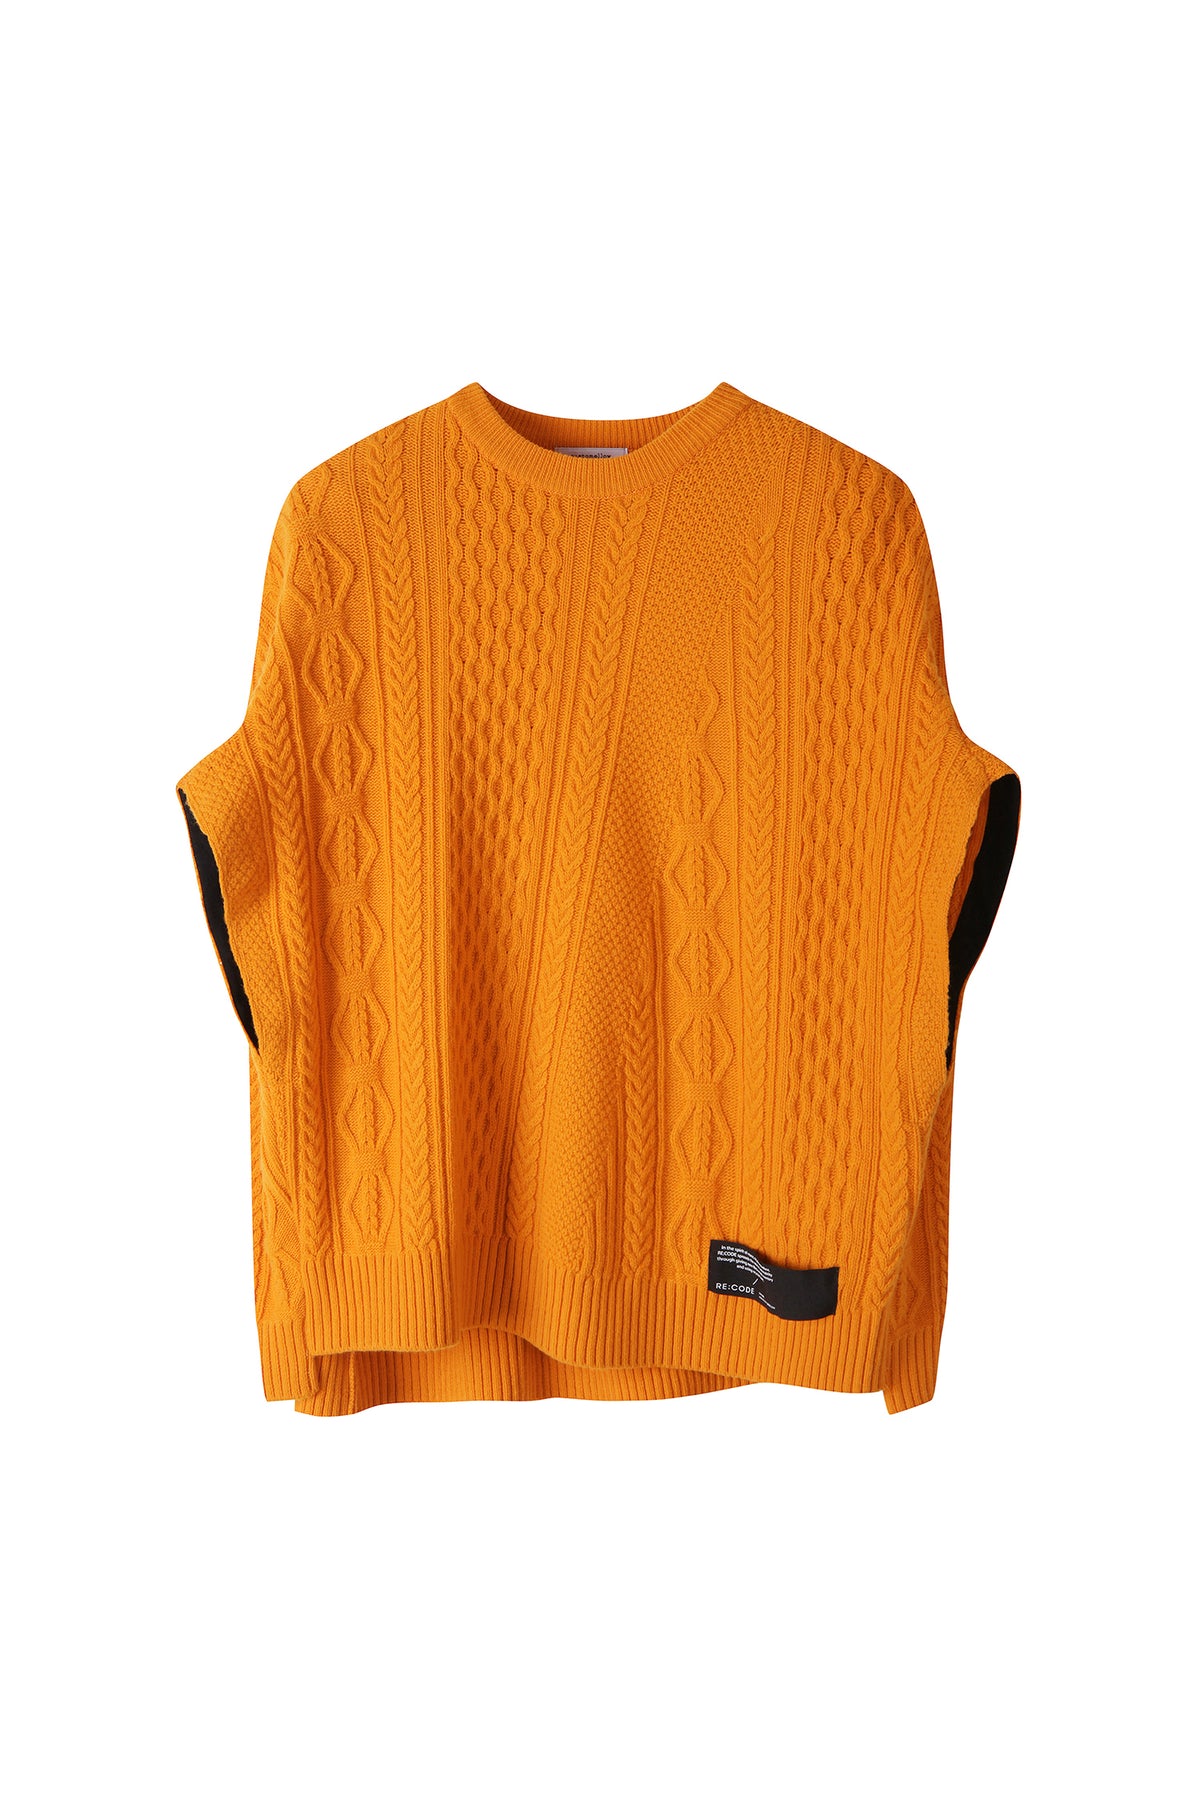 RE;constructed pullover sweater